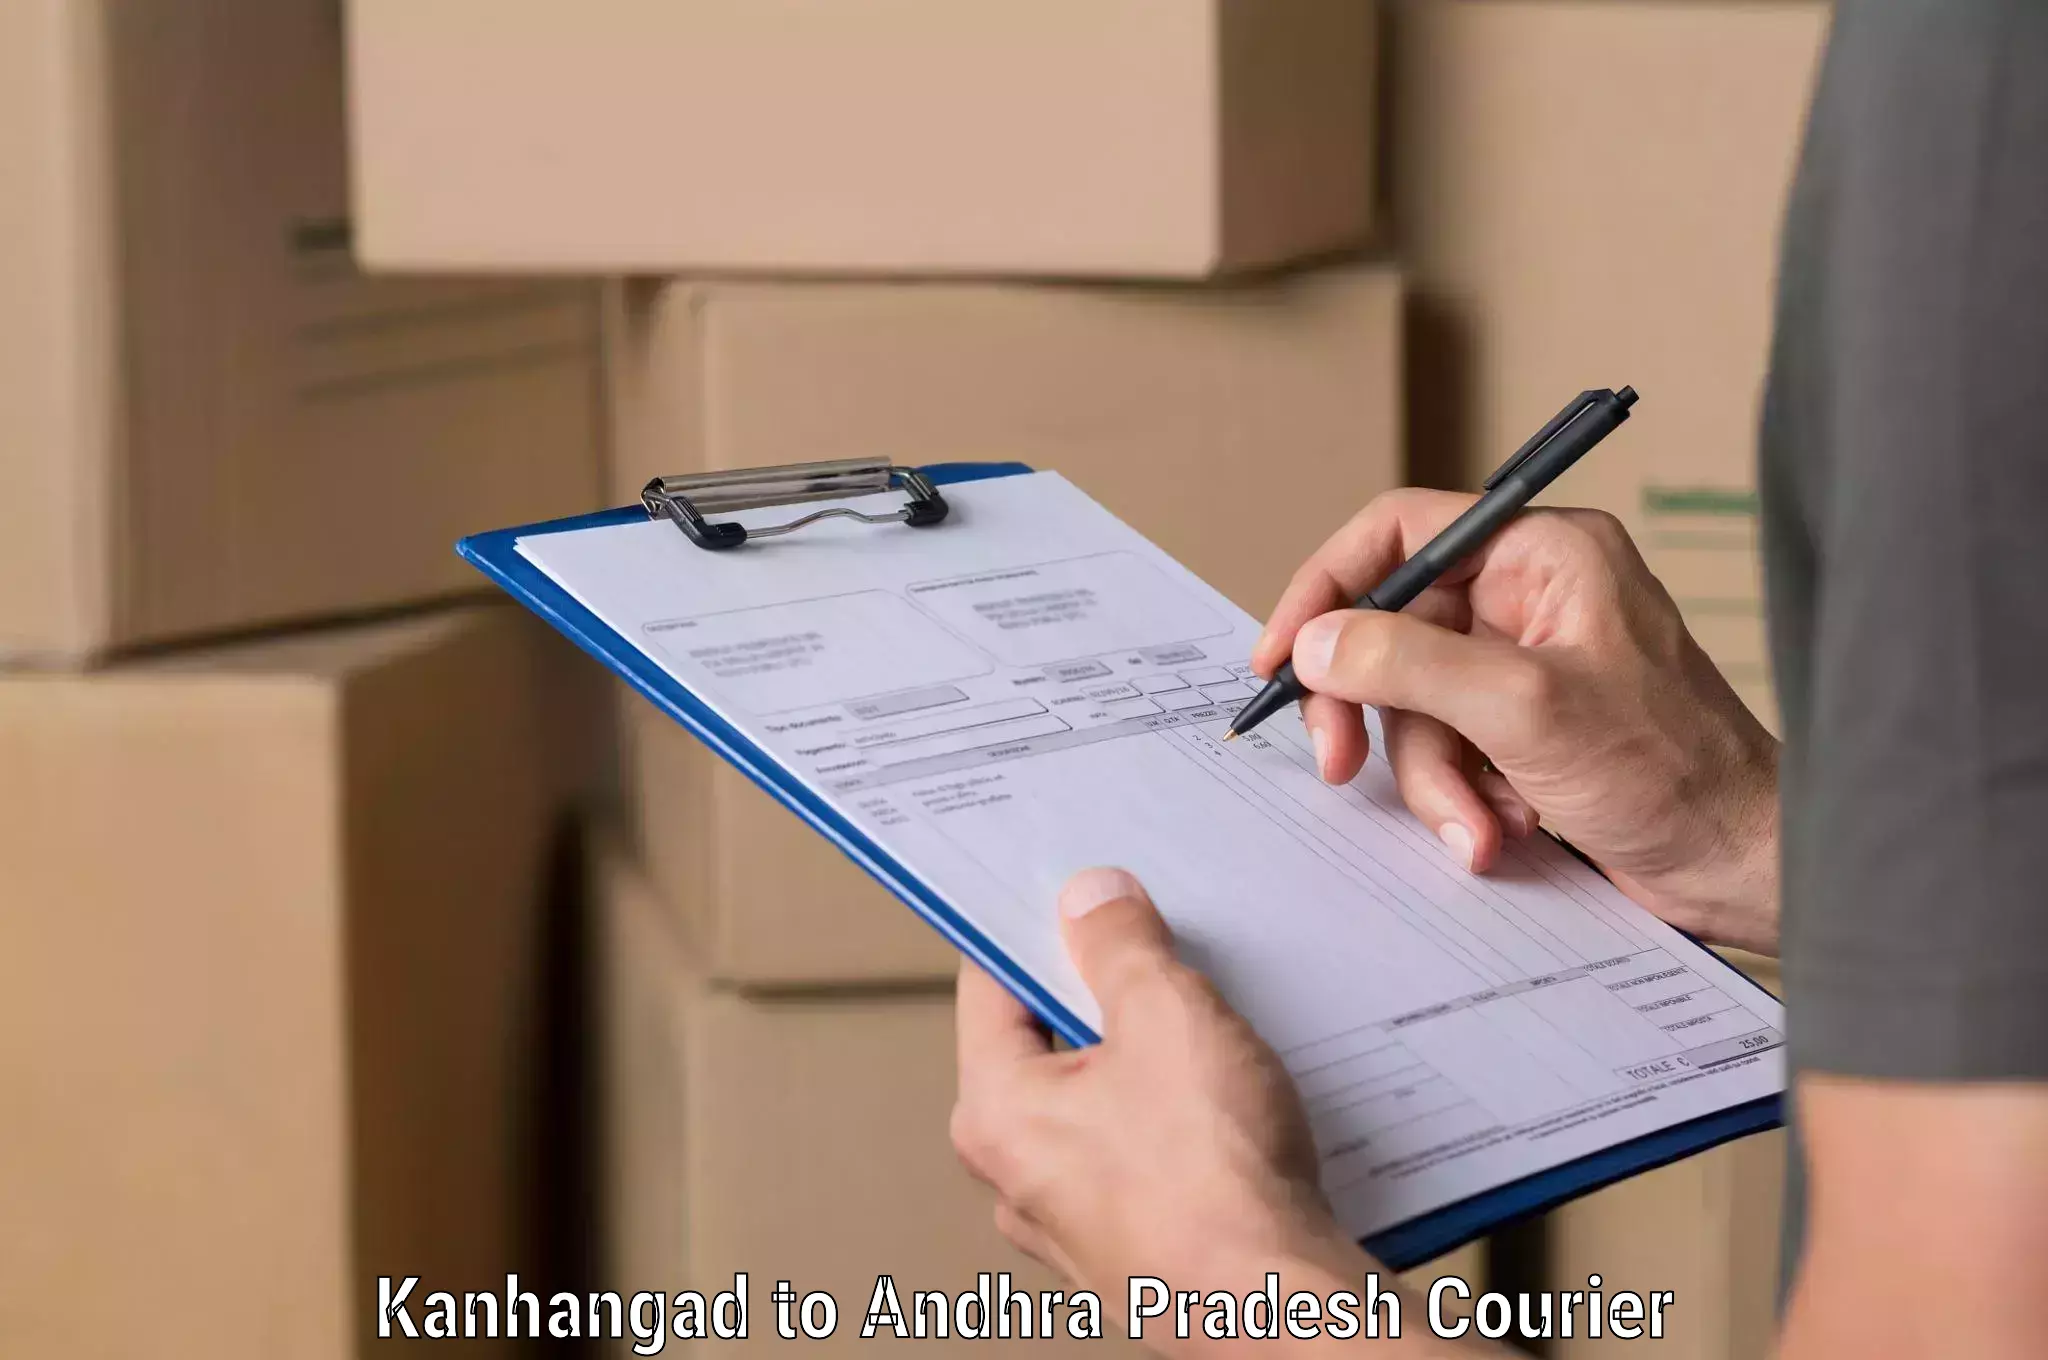 Global courier networks Kanhangad to Challapalli